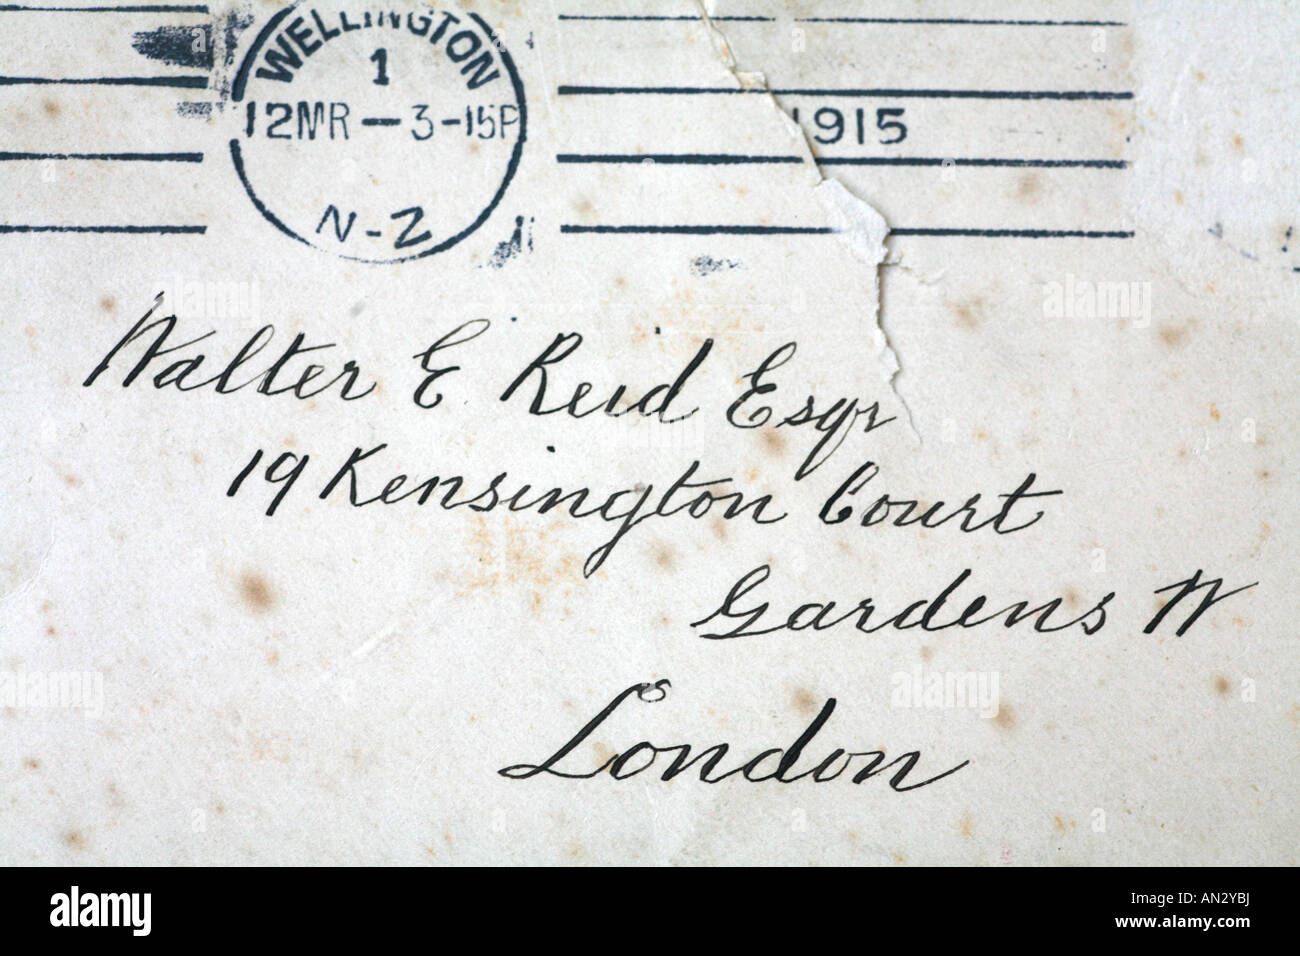 Early Twentieth Century Letter with Copperplate writing Stock Photo